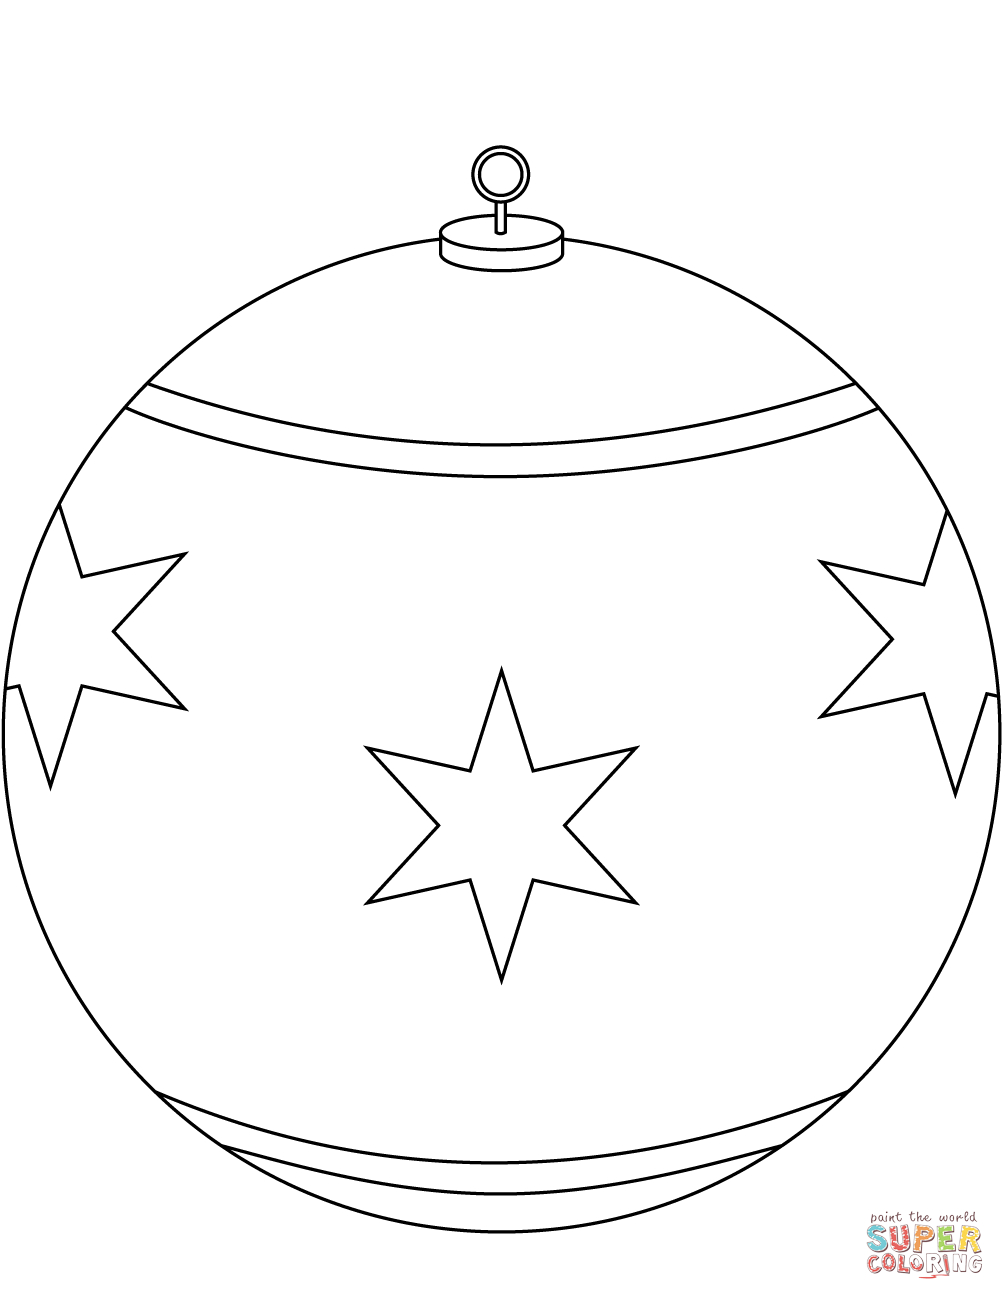 Round Christmas Ornament Coloring Page | Free Printable Coloring Pages - Free Printable Christmas Ornaments